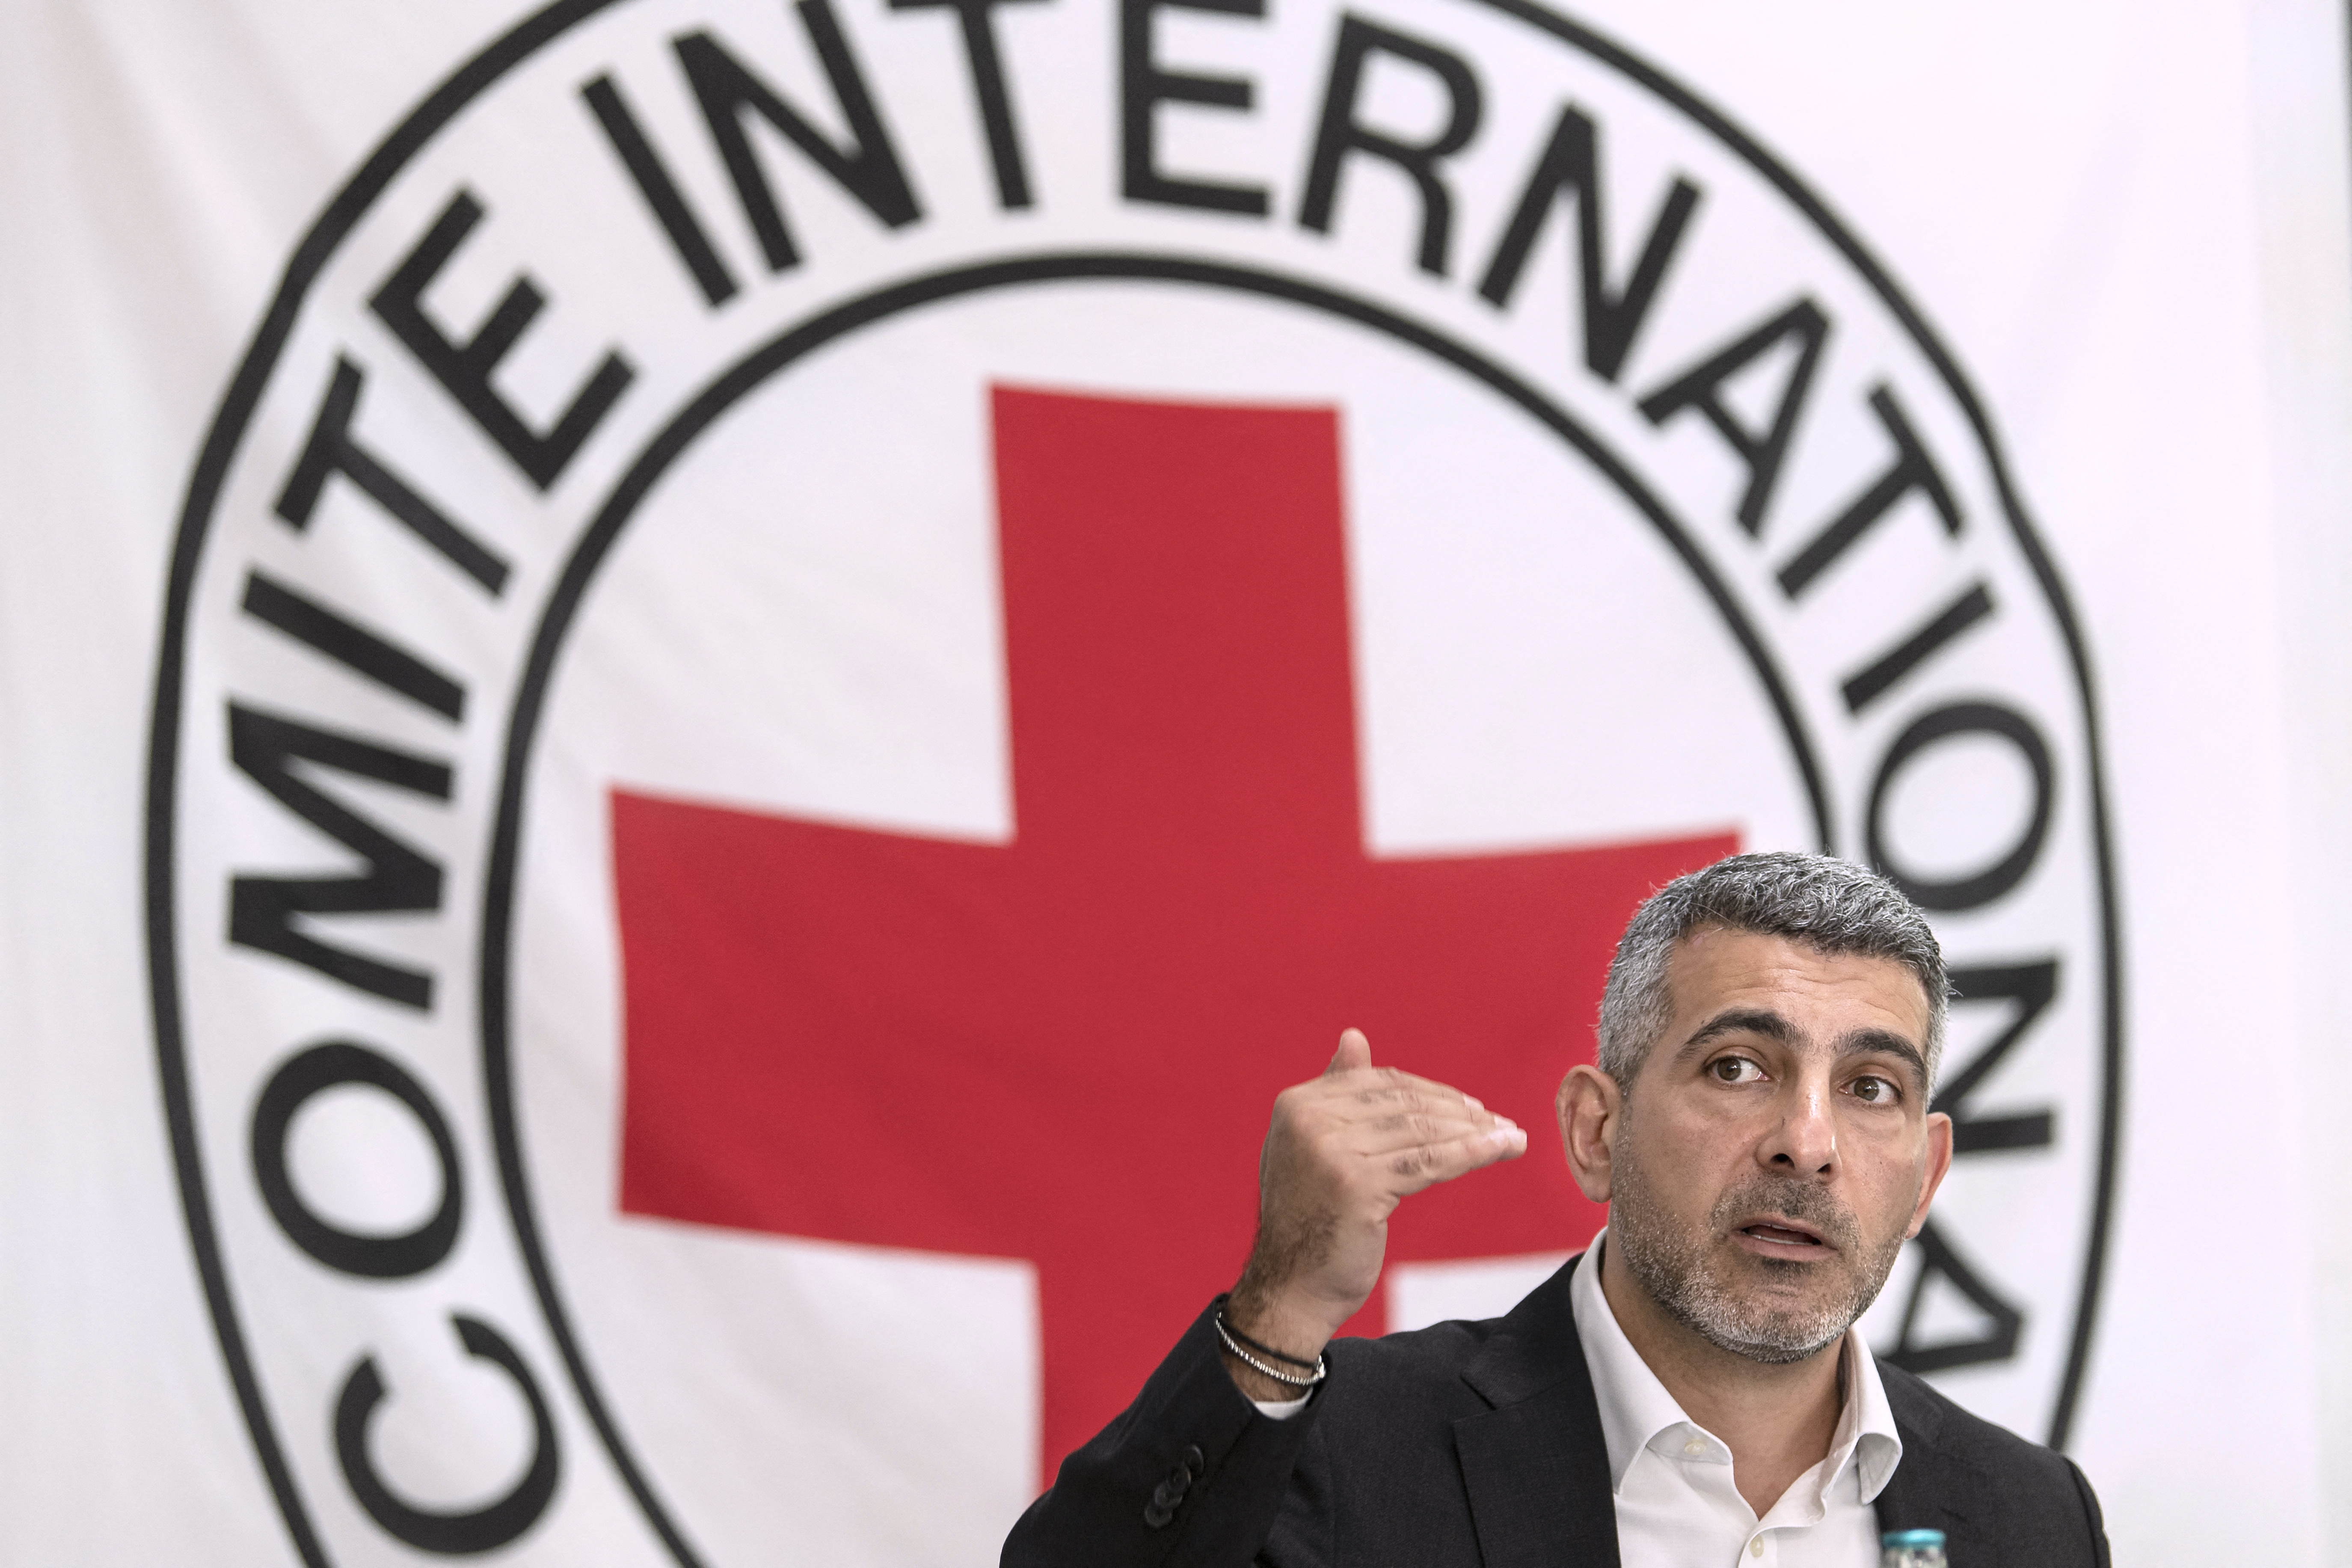 Patrick Youssef is the regional director for Africa at the International Committee of the Red Cross (ICRC)